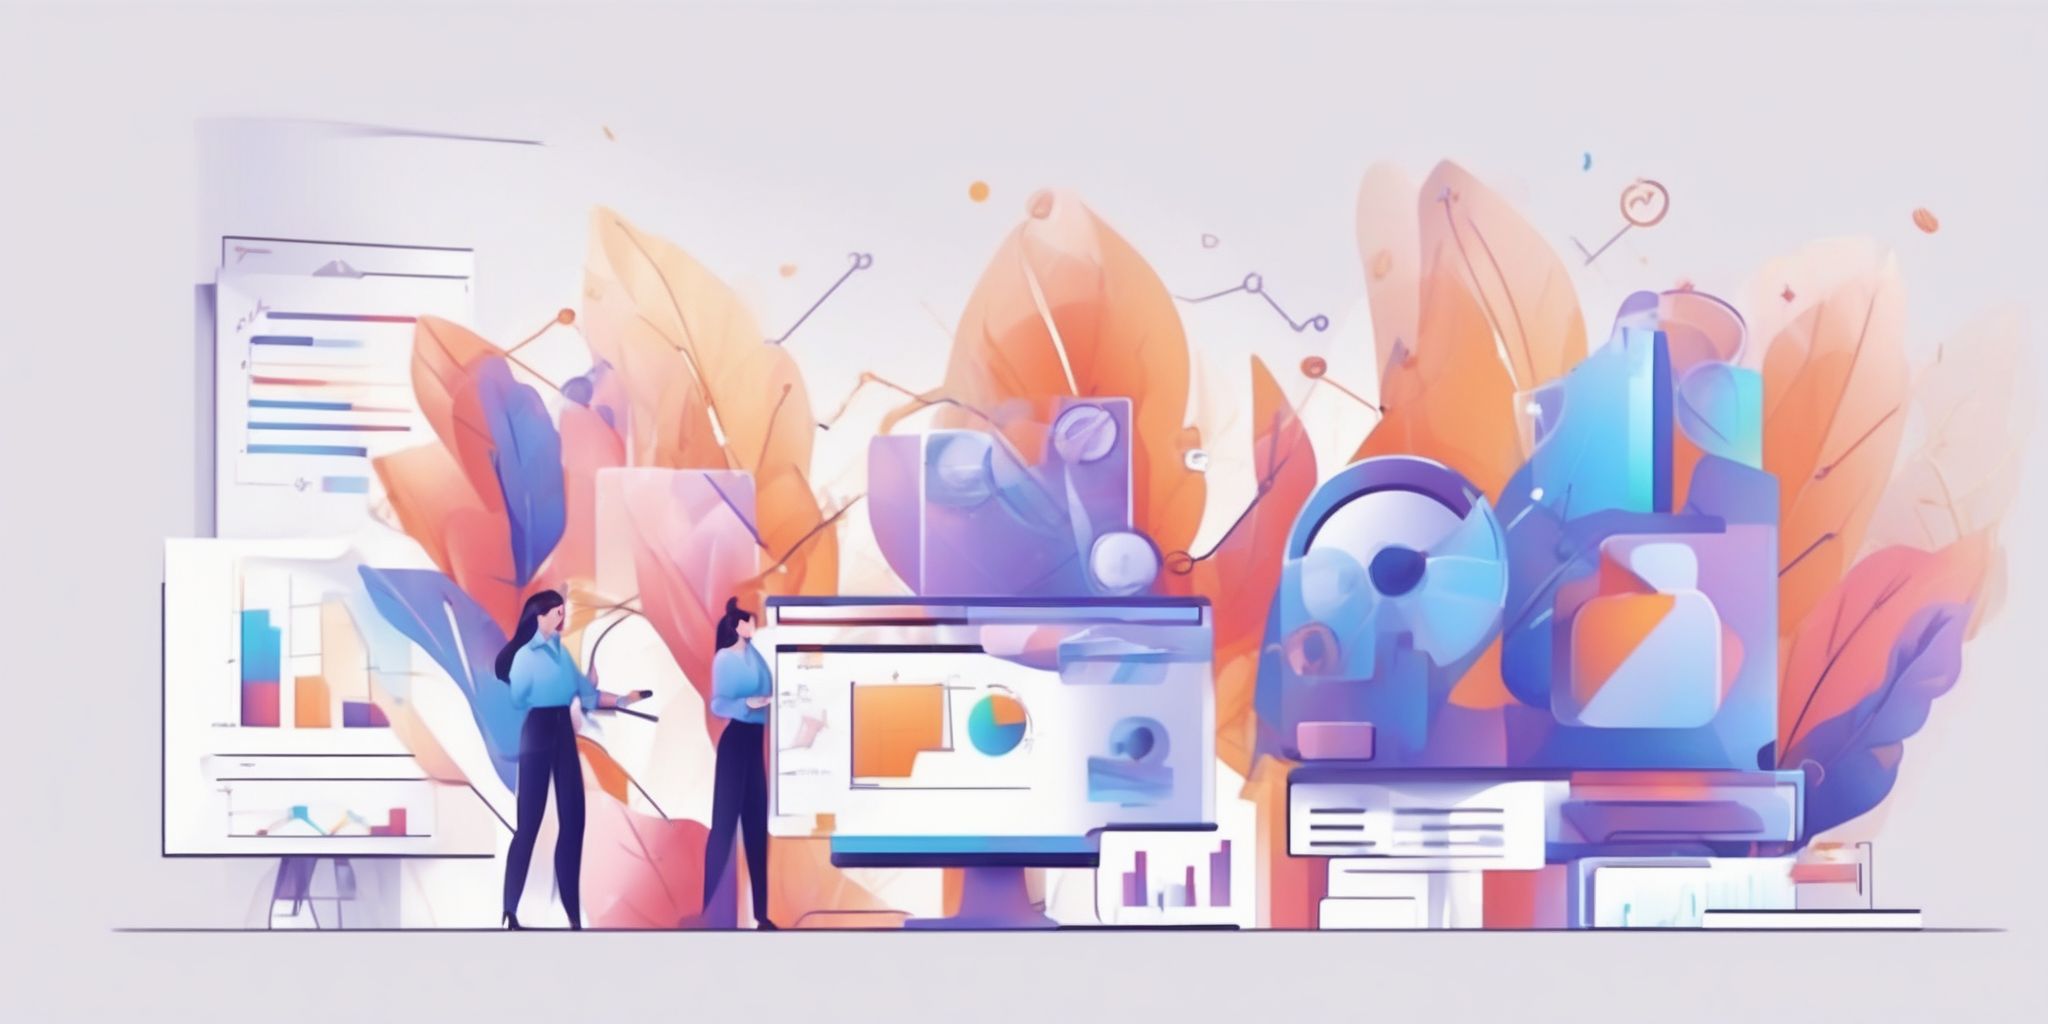 audit in illustration style with gradients and white background